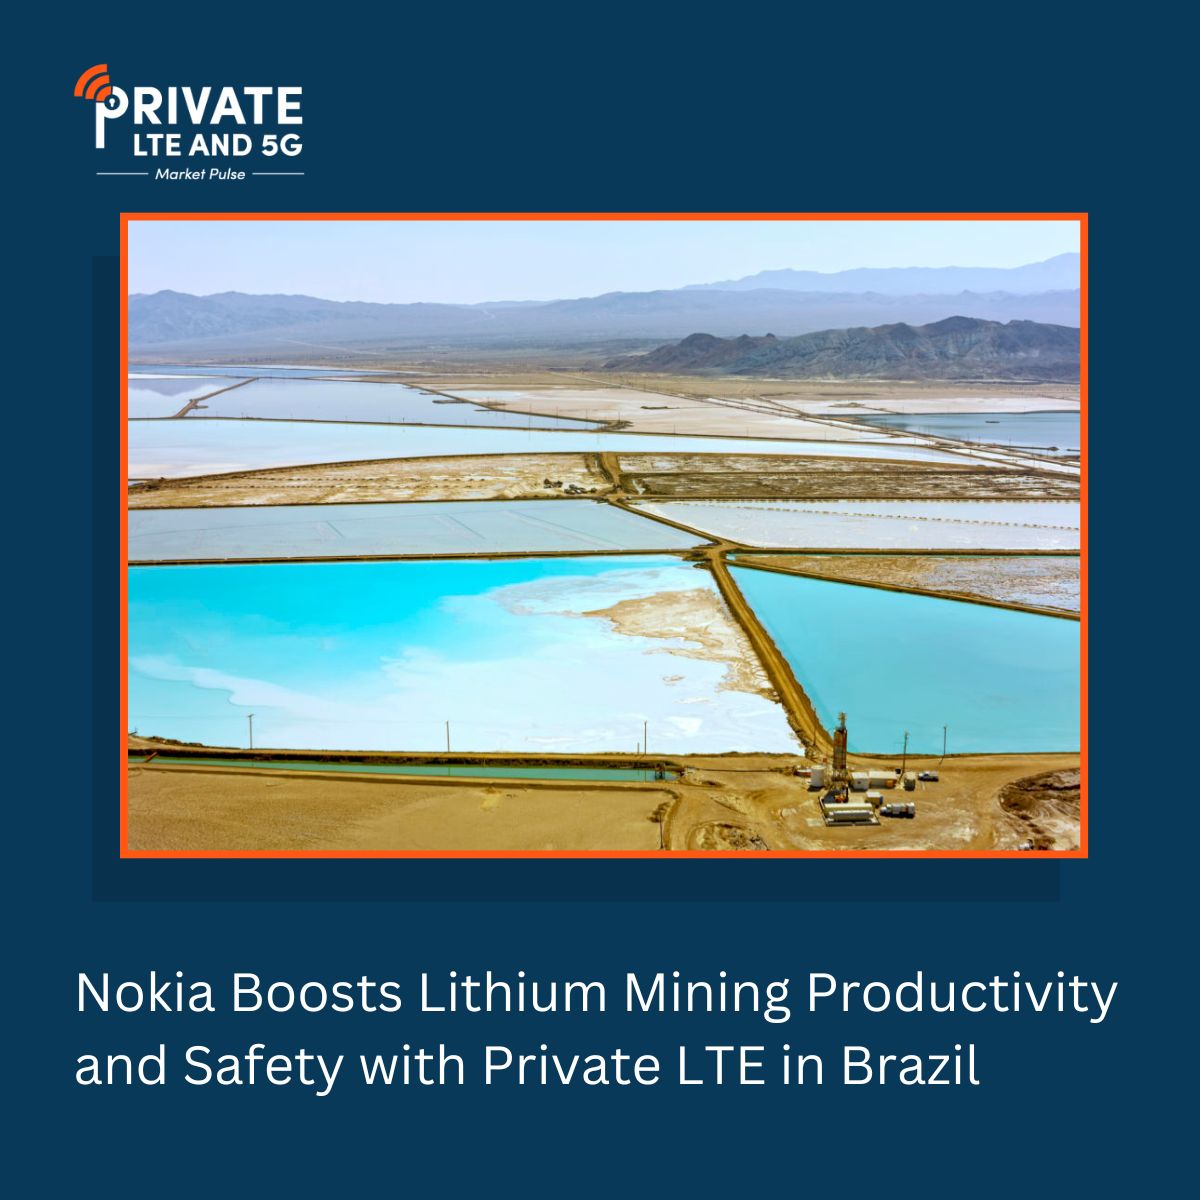 As demand skyrockets, this private 4G network will connect 200 employees and enable a range of smart mining applications powered by industrial edge computing. To know more: privatelteand5g.com/nokia-boosts-l…

#privatecellularnetworks #privatelteand5g #privatelte #private5g #privatenetworks